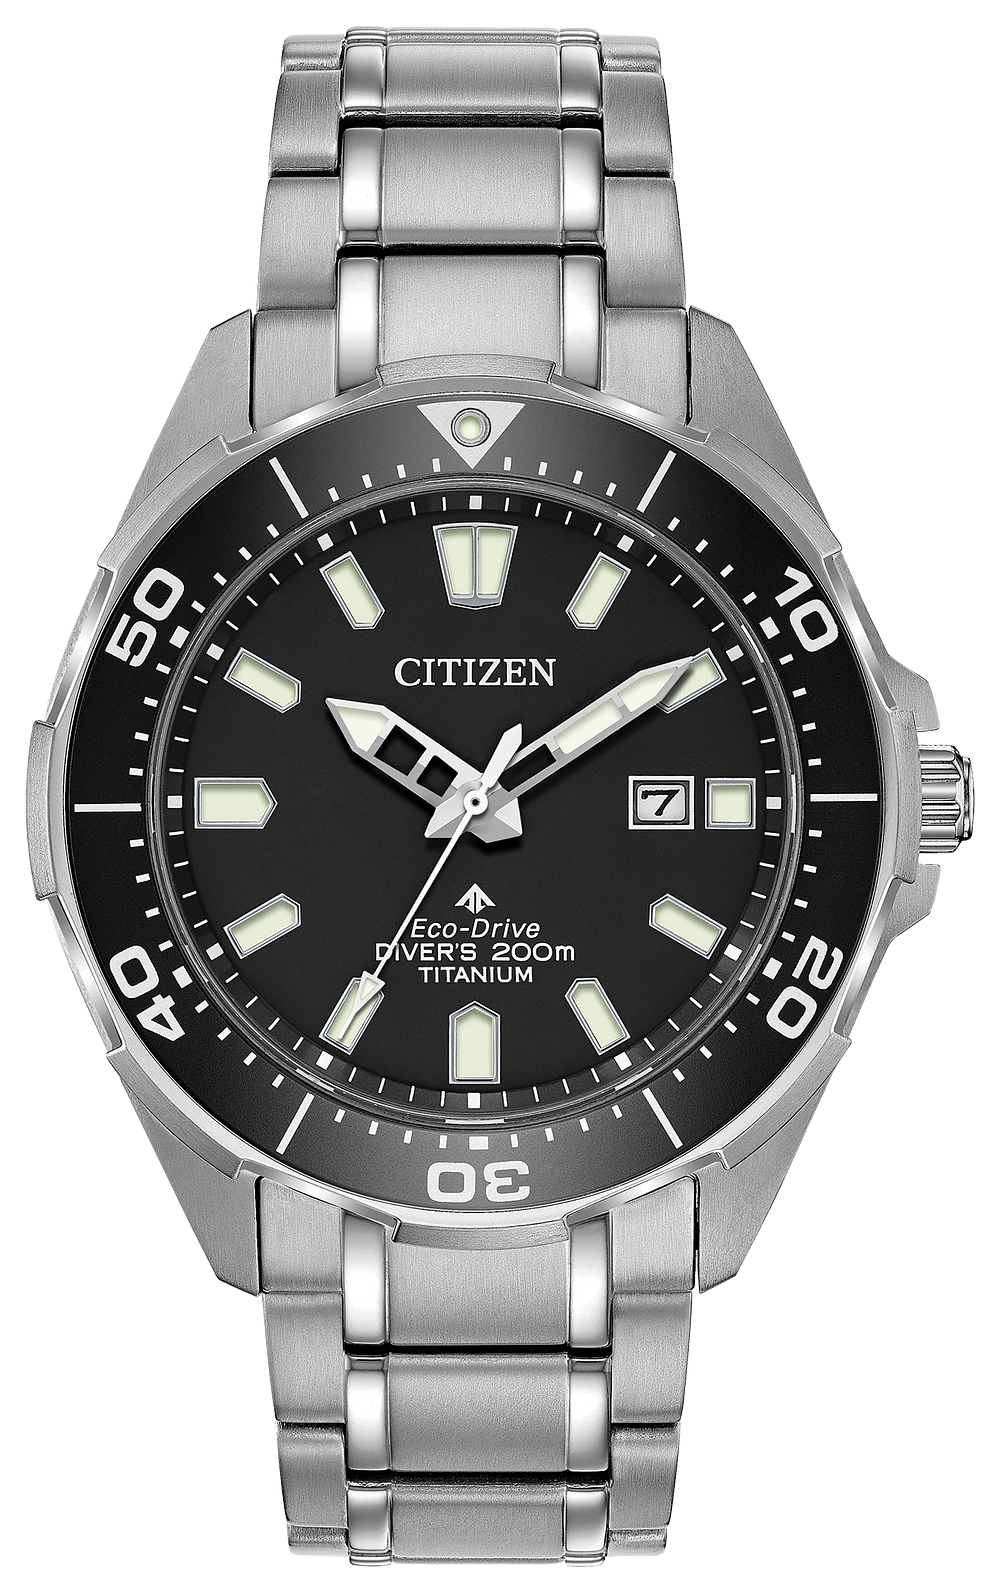 Any word on a new Citizen Eco Drive titanium diver from Baselworld 2018